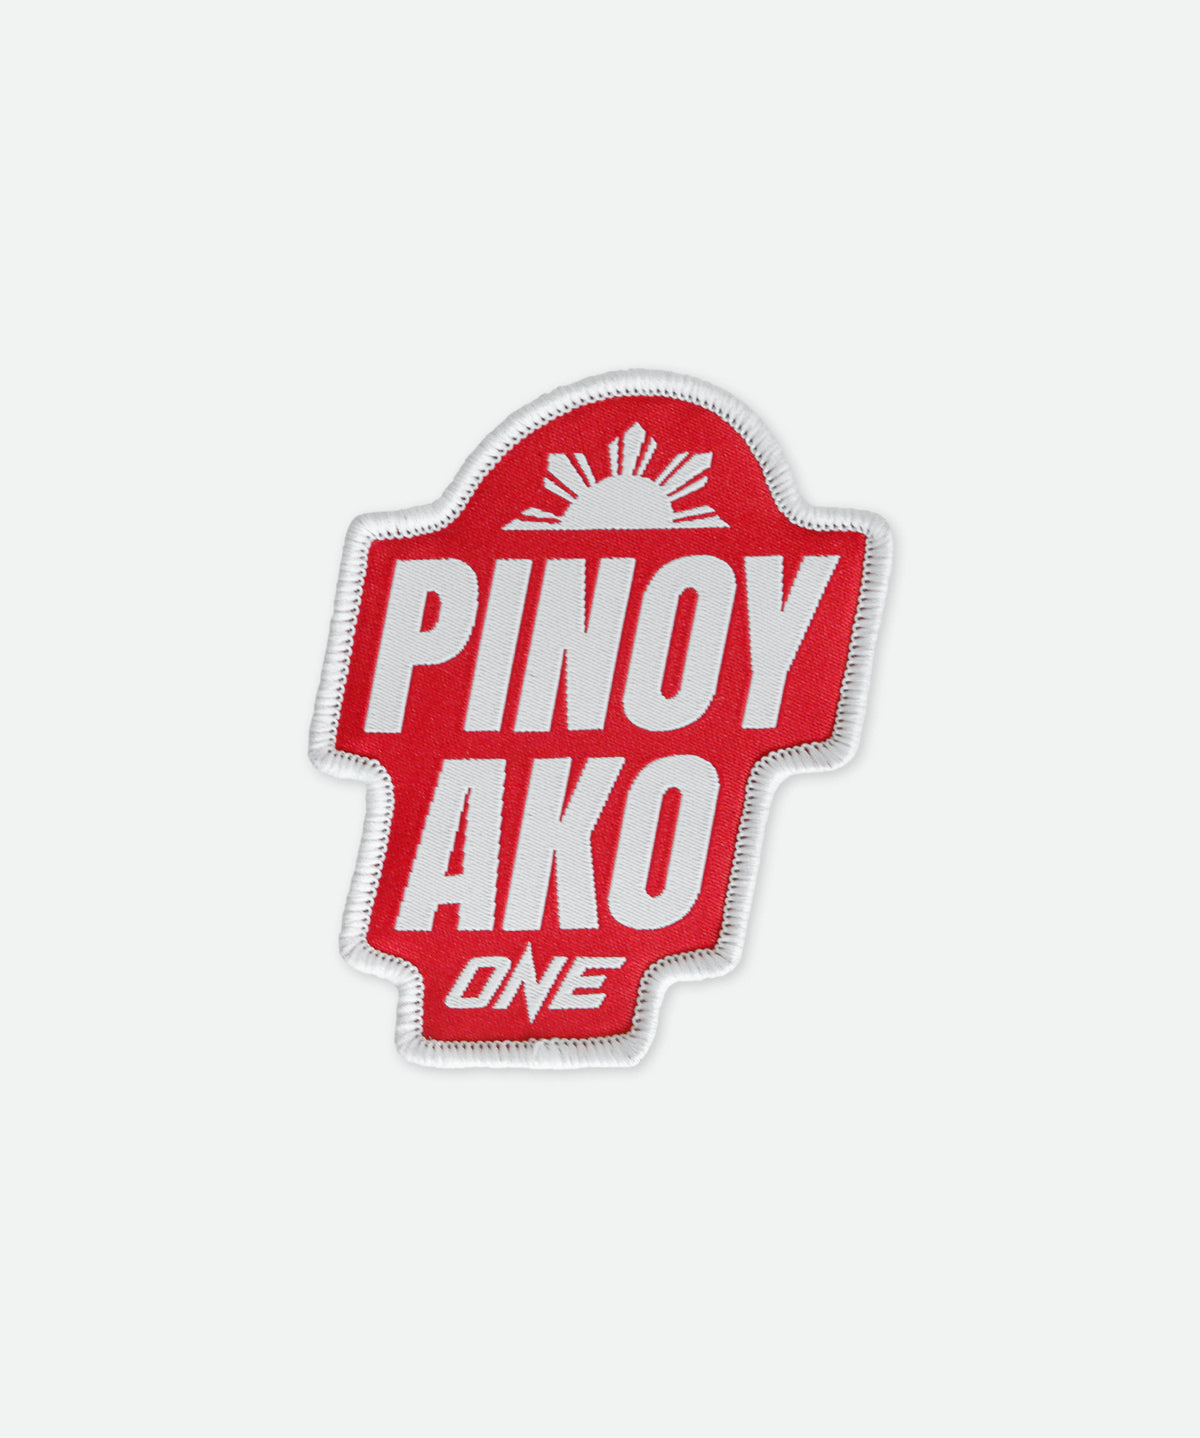 Pinoy Ako Woven Patch (Red)